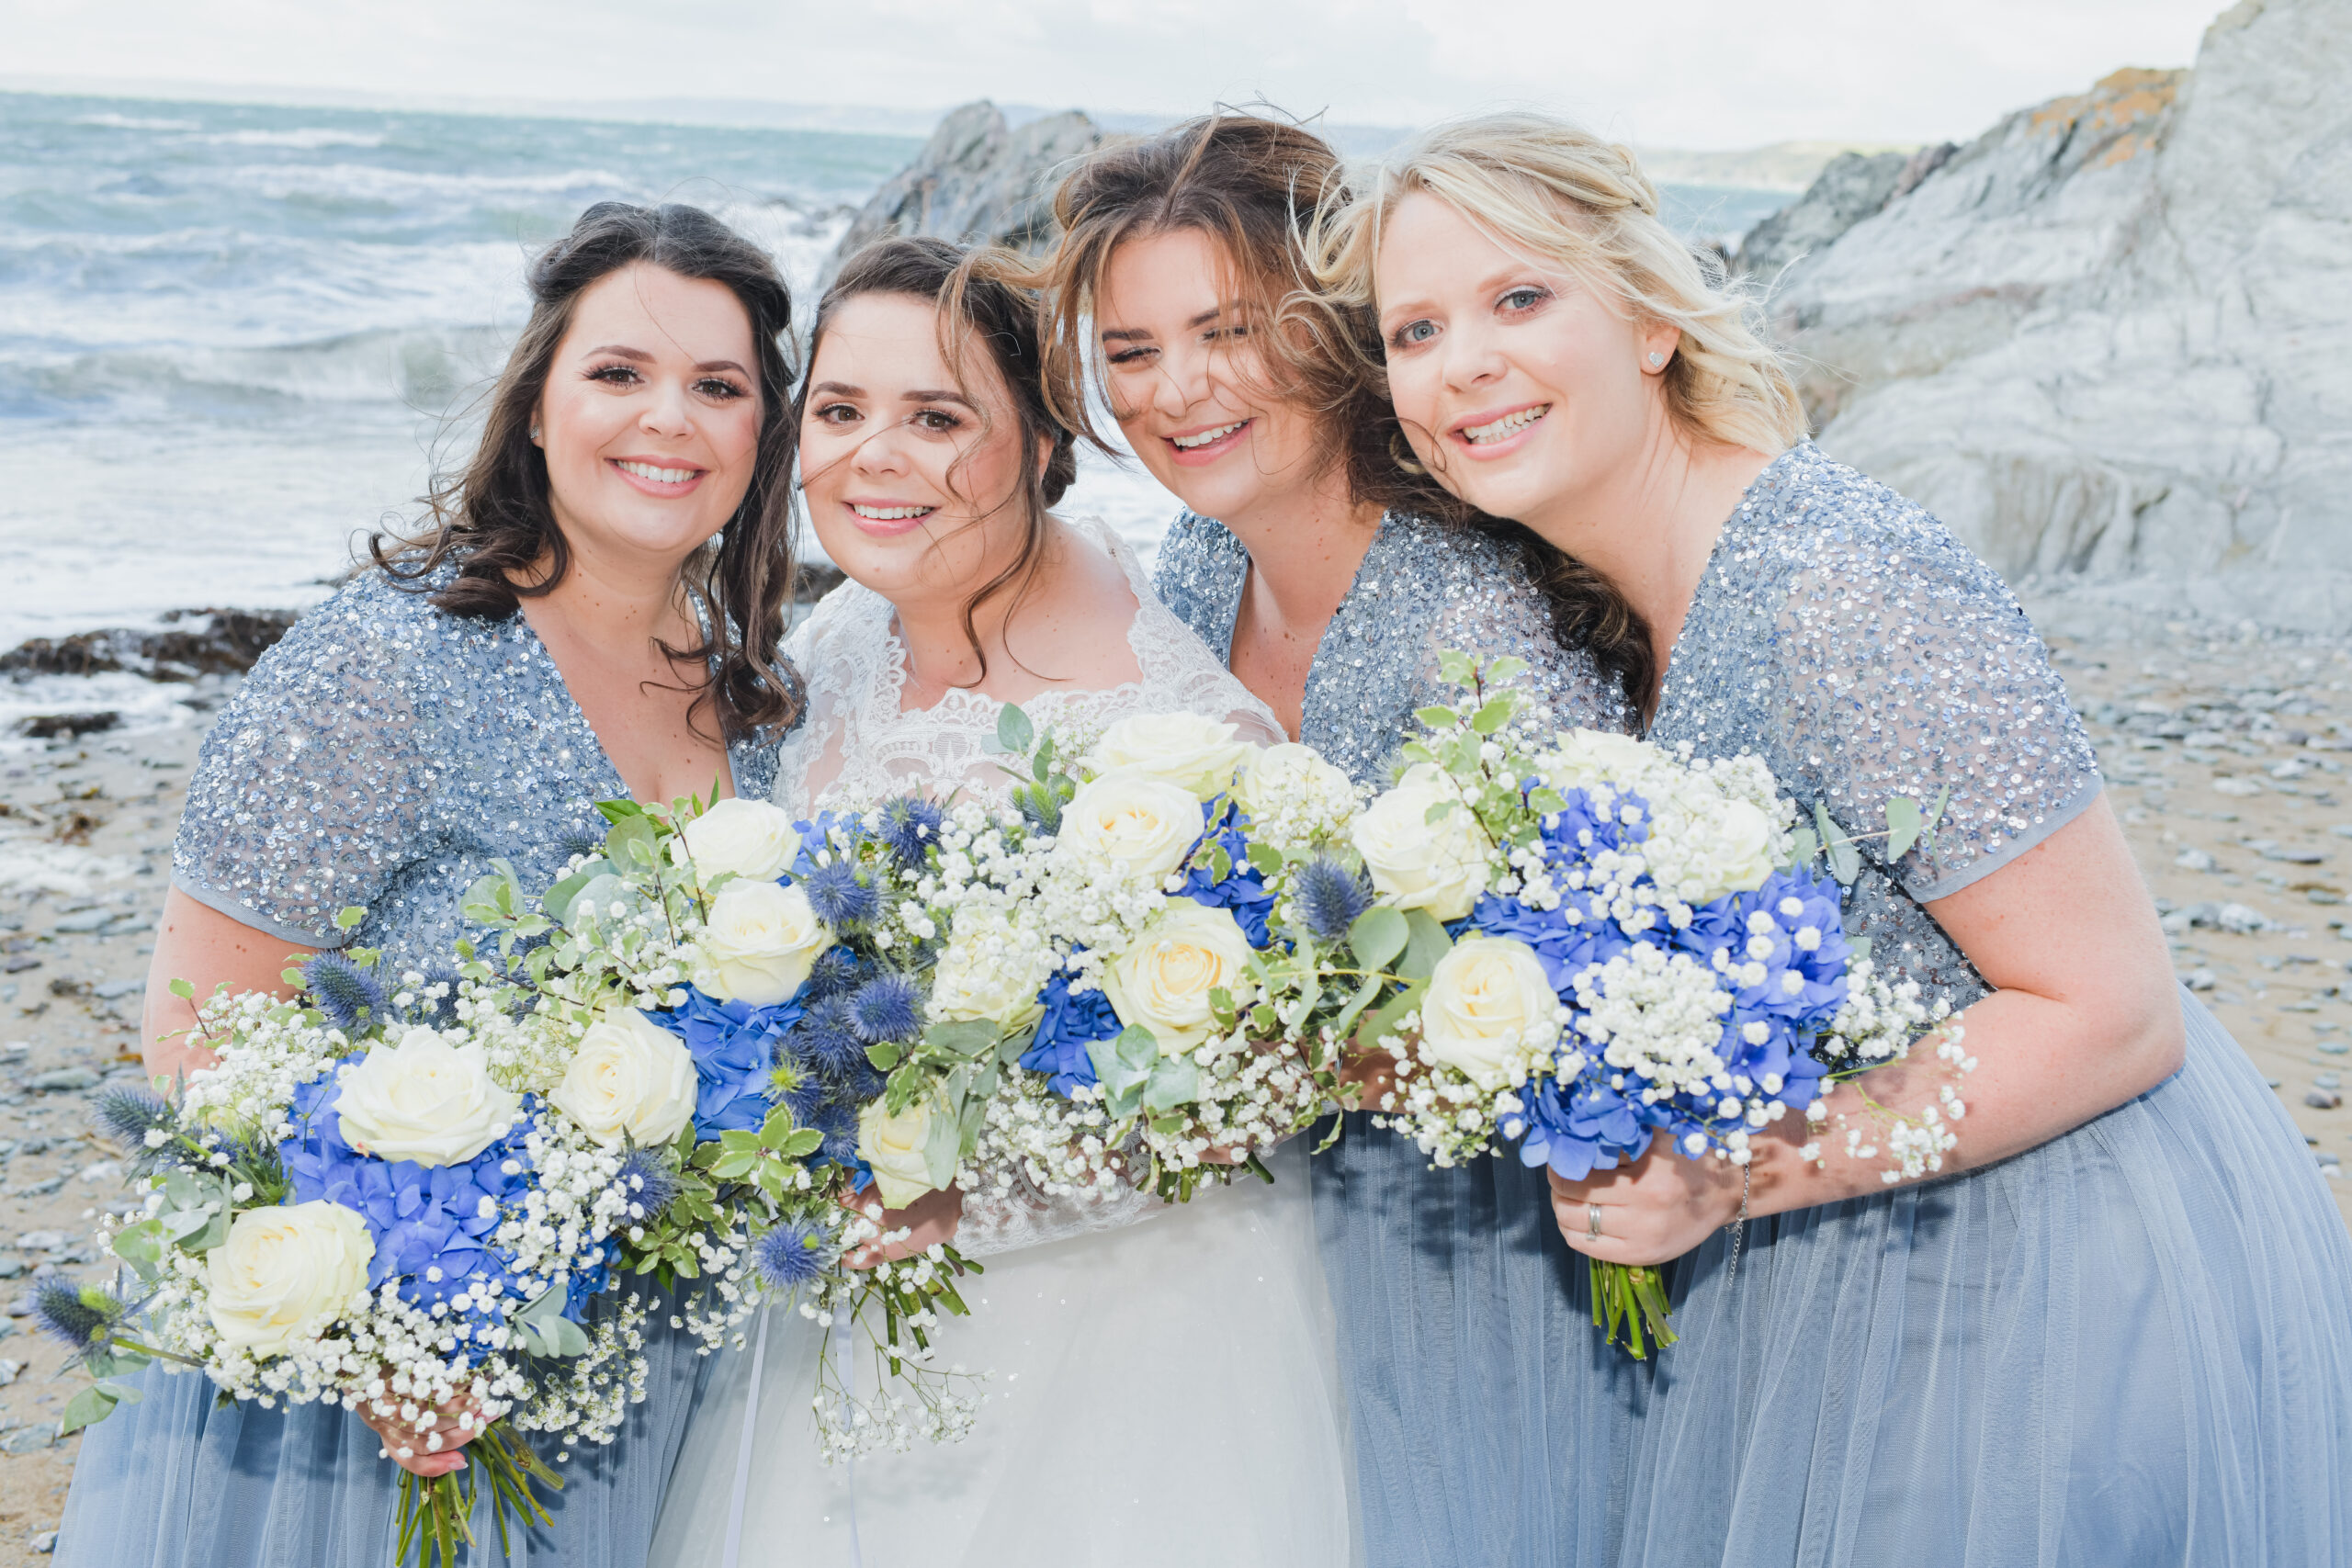 Wedding Photography on the Beach at Polhawn Fort with the Bridesmaids